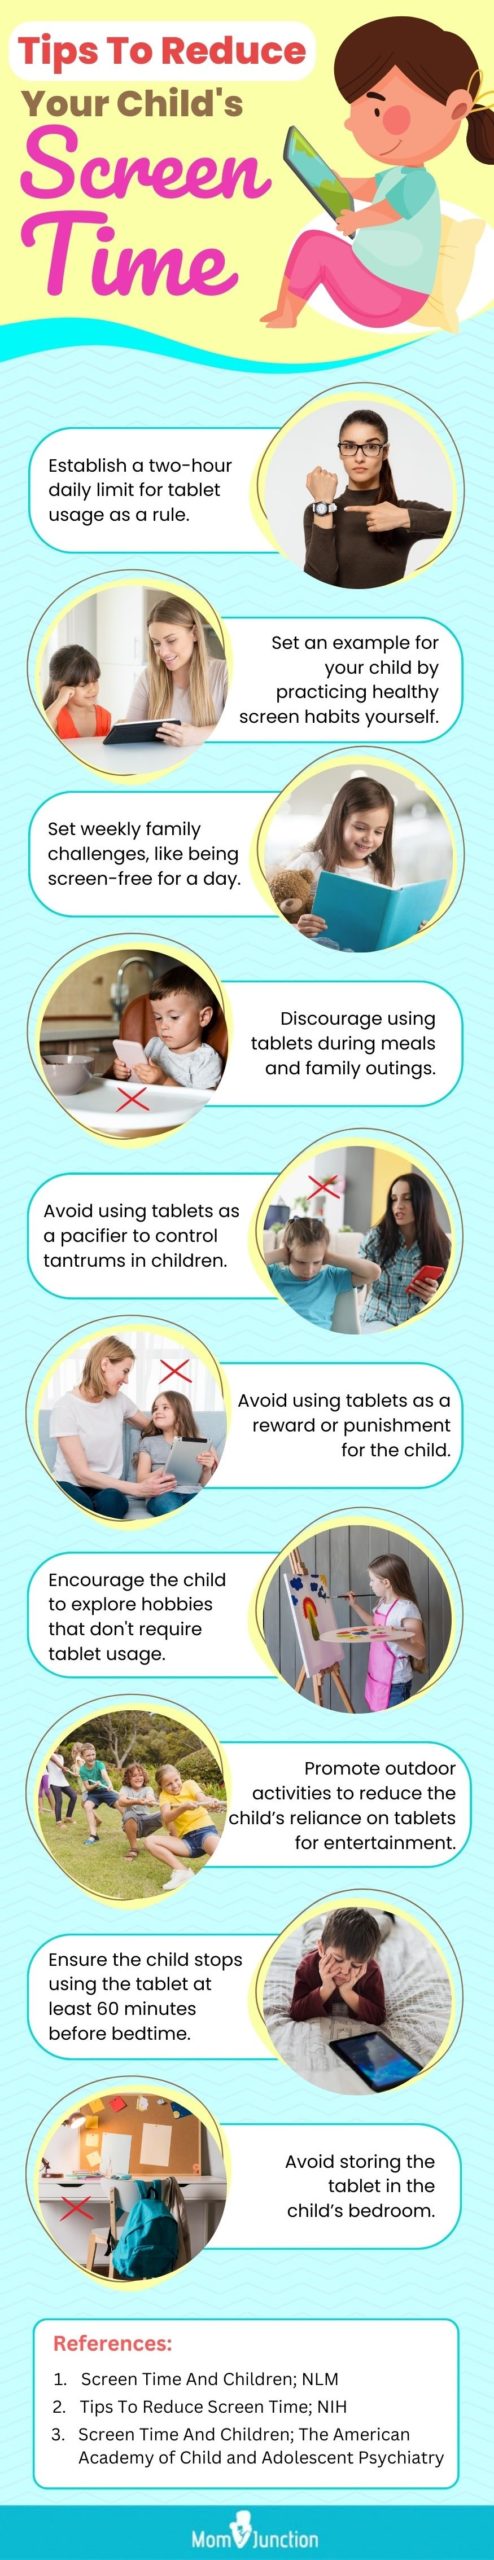 Tips To Reduce Your Child's Screen Time (infographic)